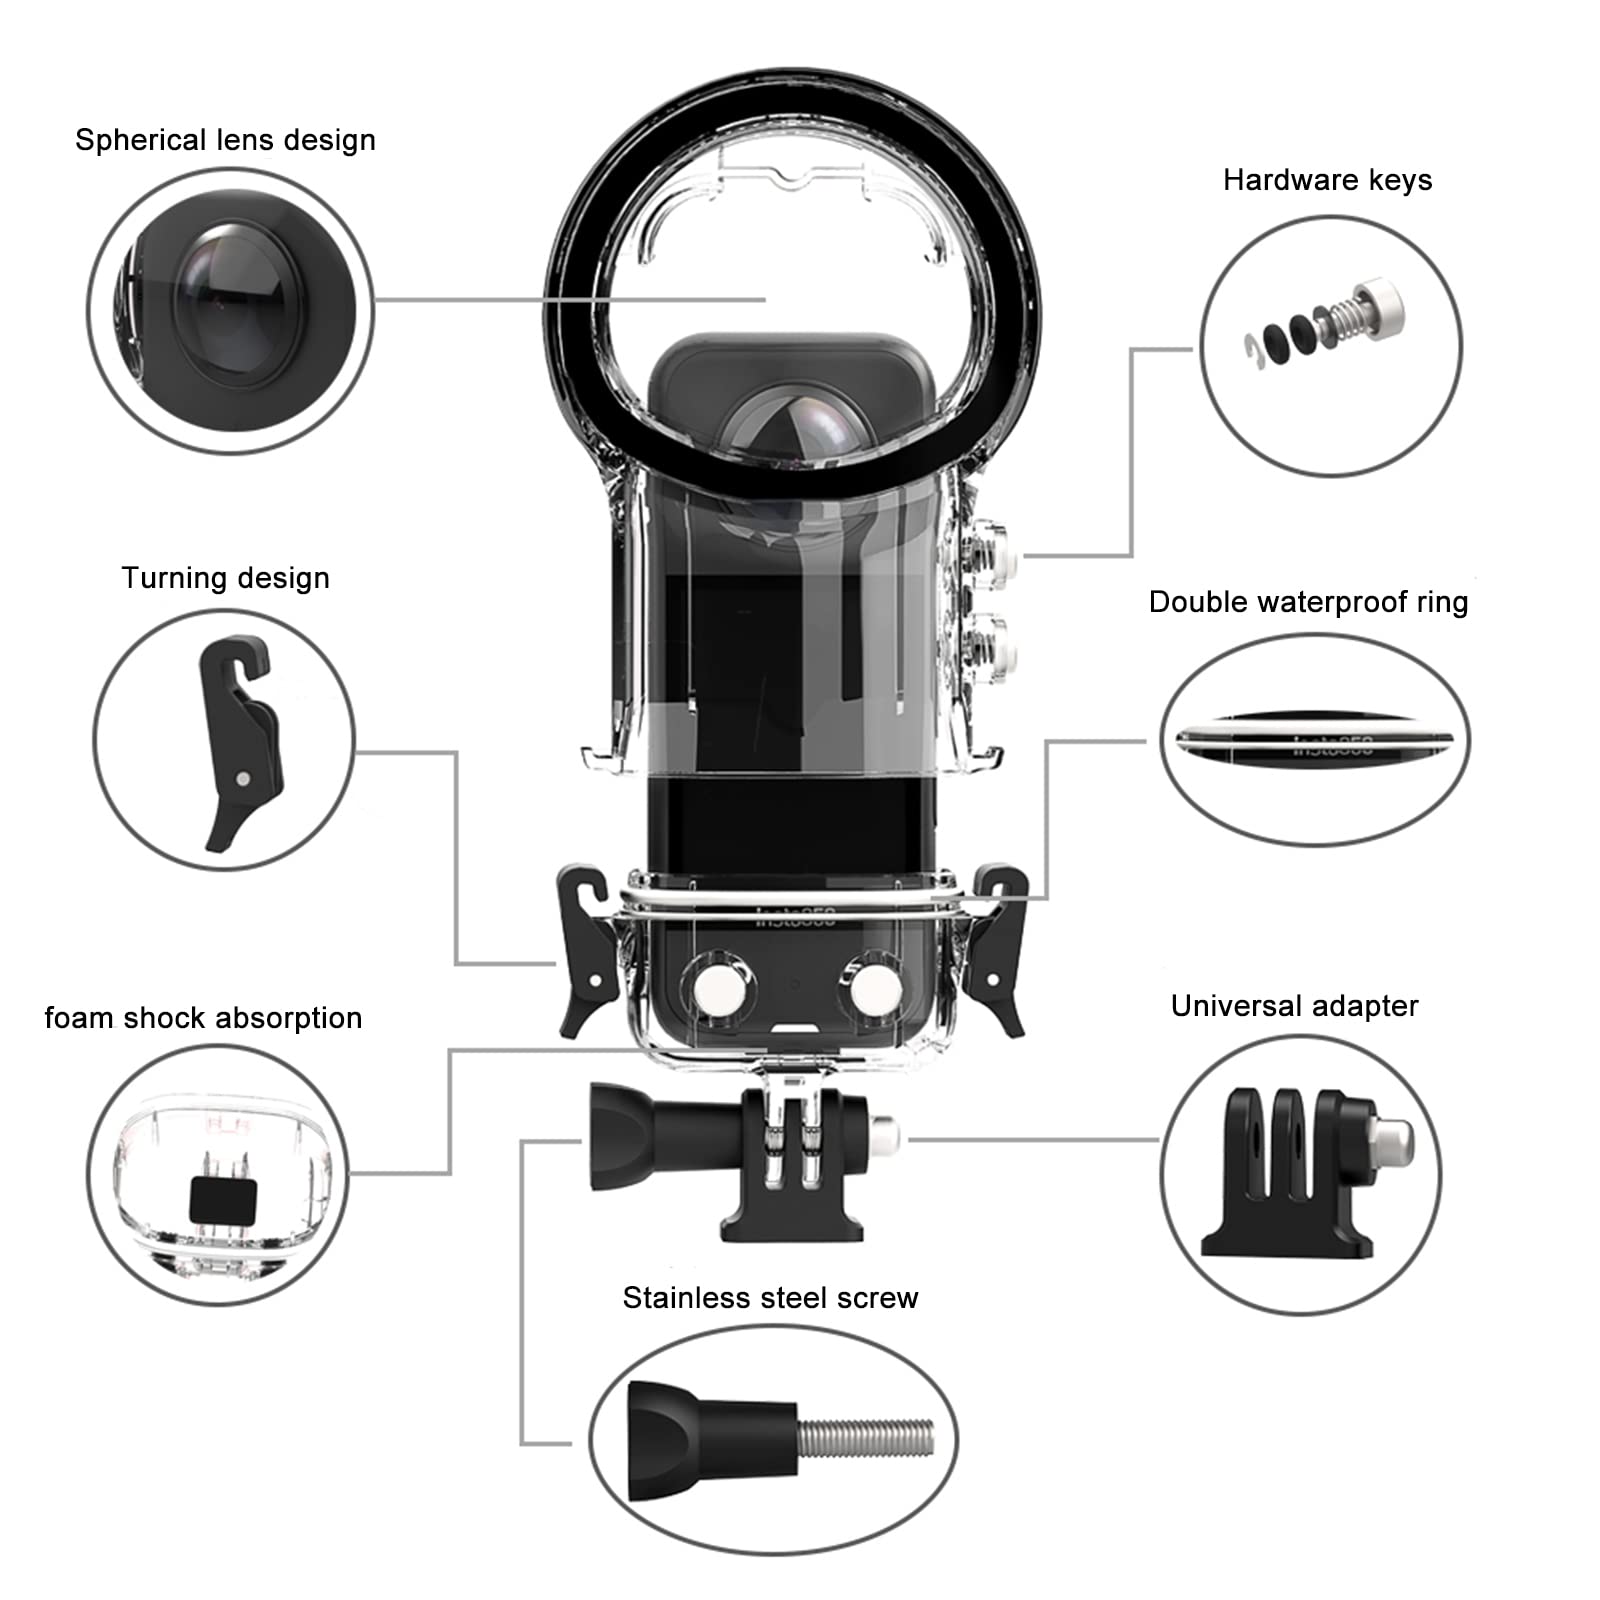 HUAYUWA 30M Dive Case with Silicon Lens Cap for Insta360 X3 Action Camera Waterproof Case with Bracket Accessories 98FT Underwater Photography Housing for Insta 360 One X3 Diving Case